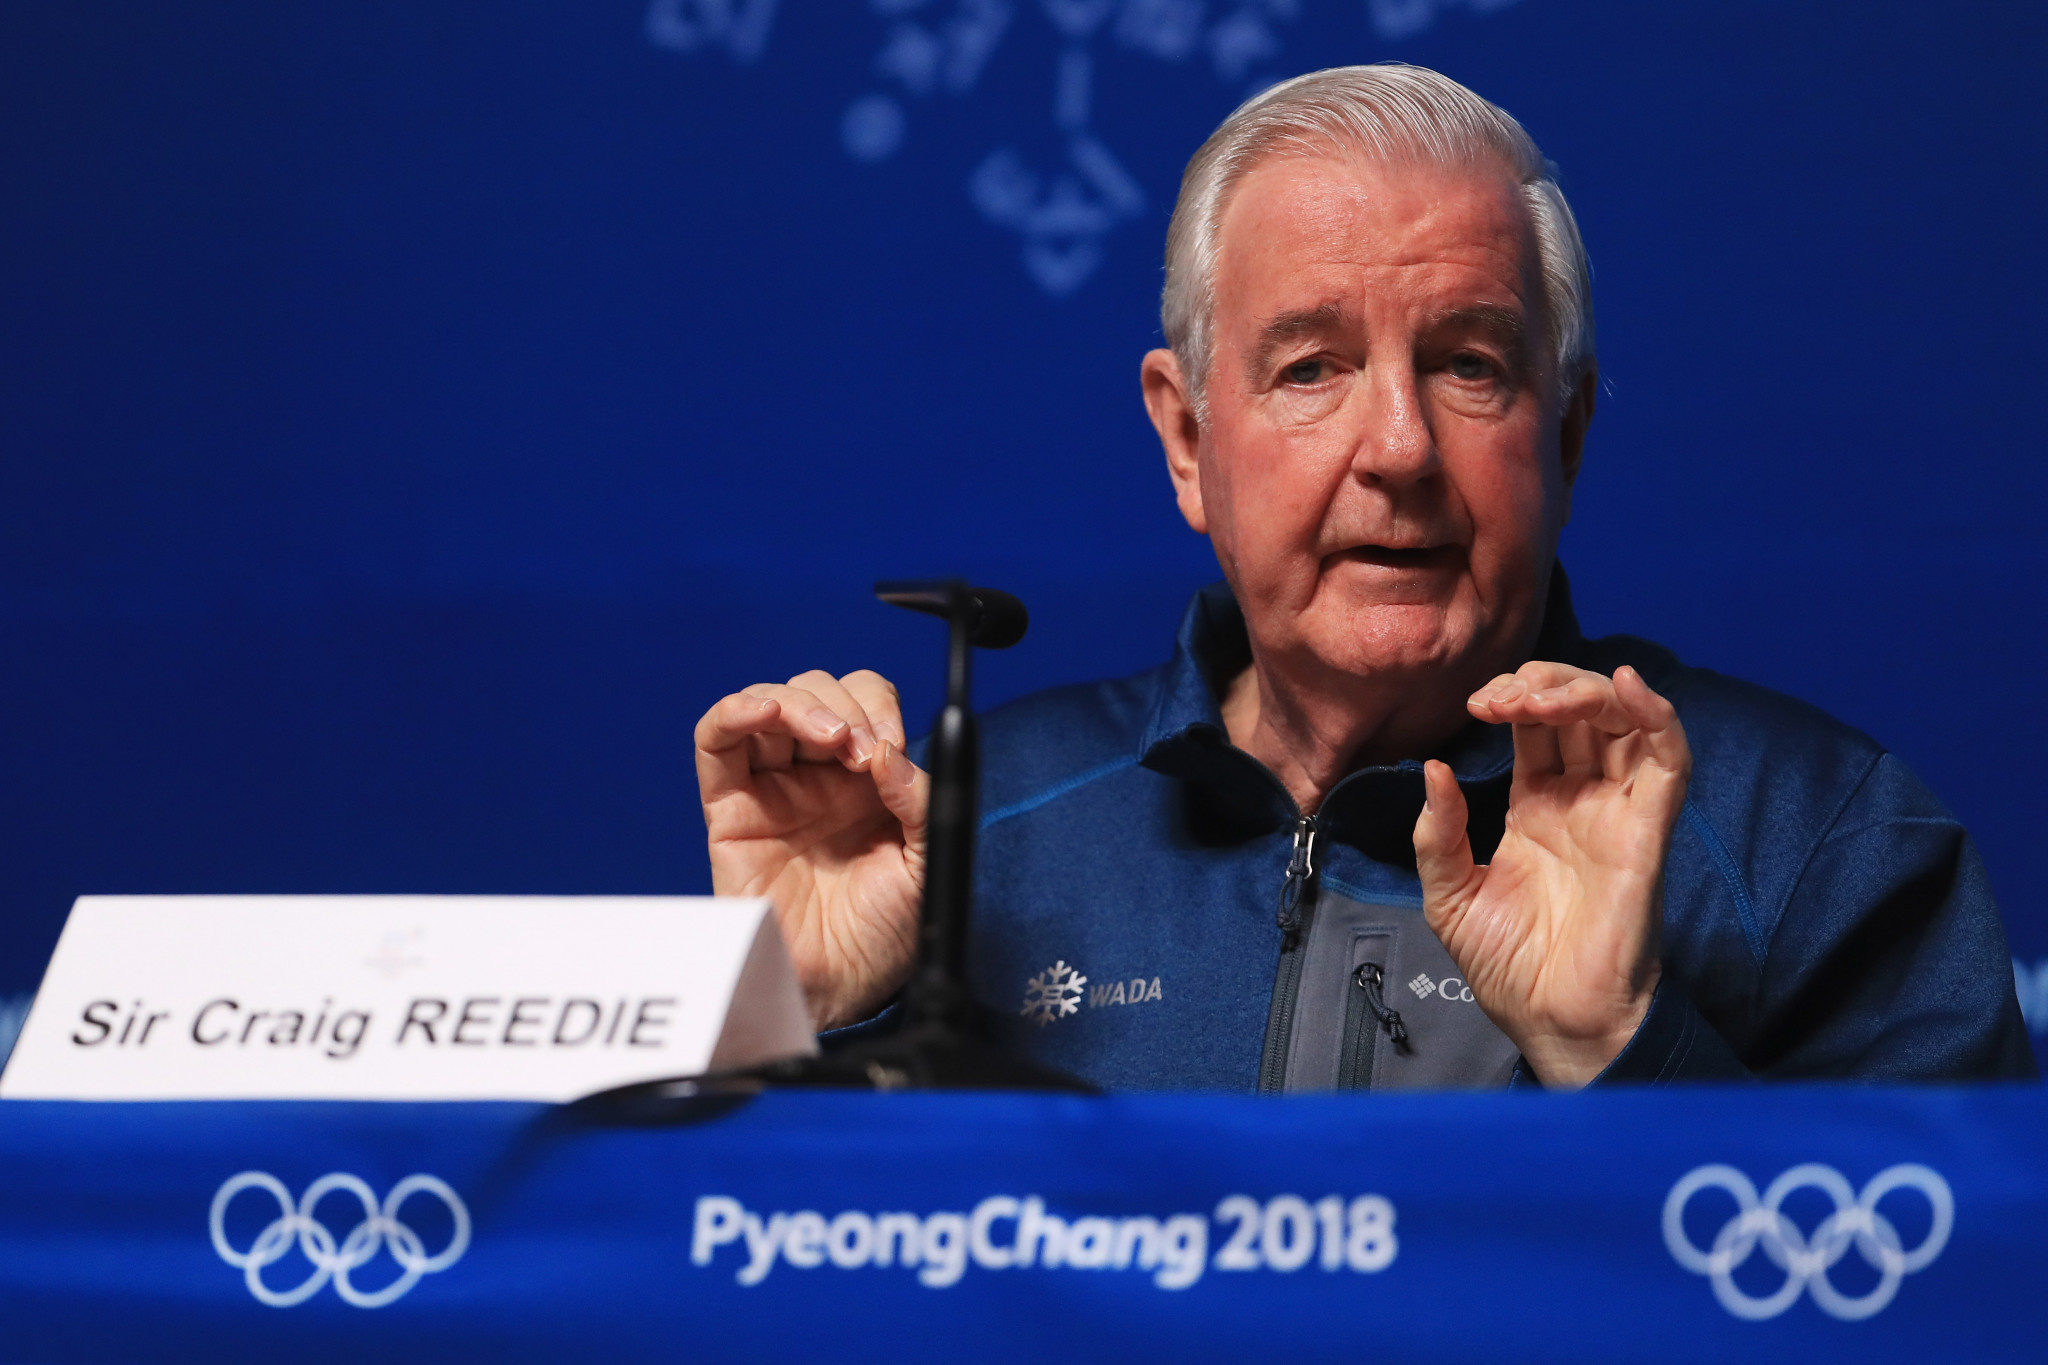 WADA President Sir Craig Reedie welcomed the CAS verdicts today ©Getty Images